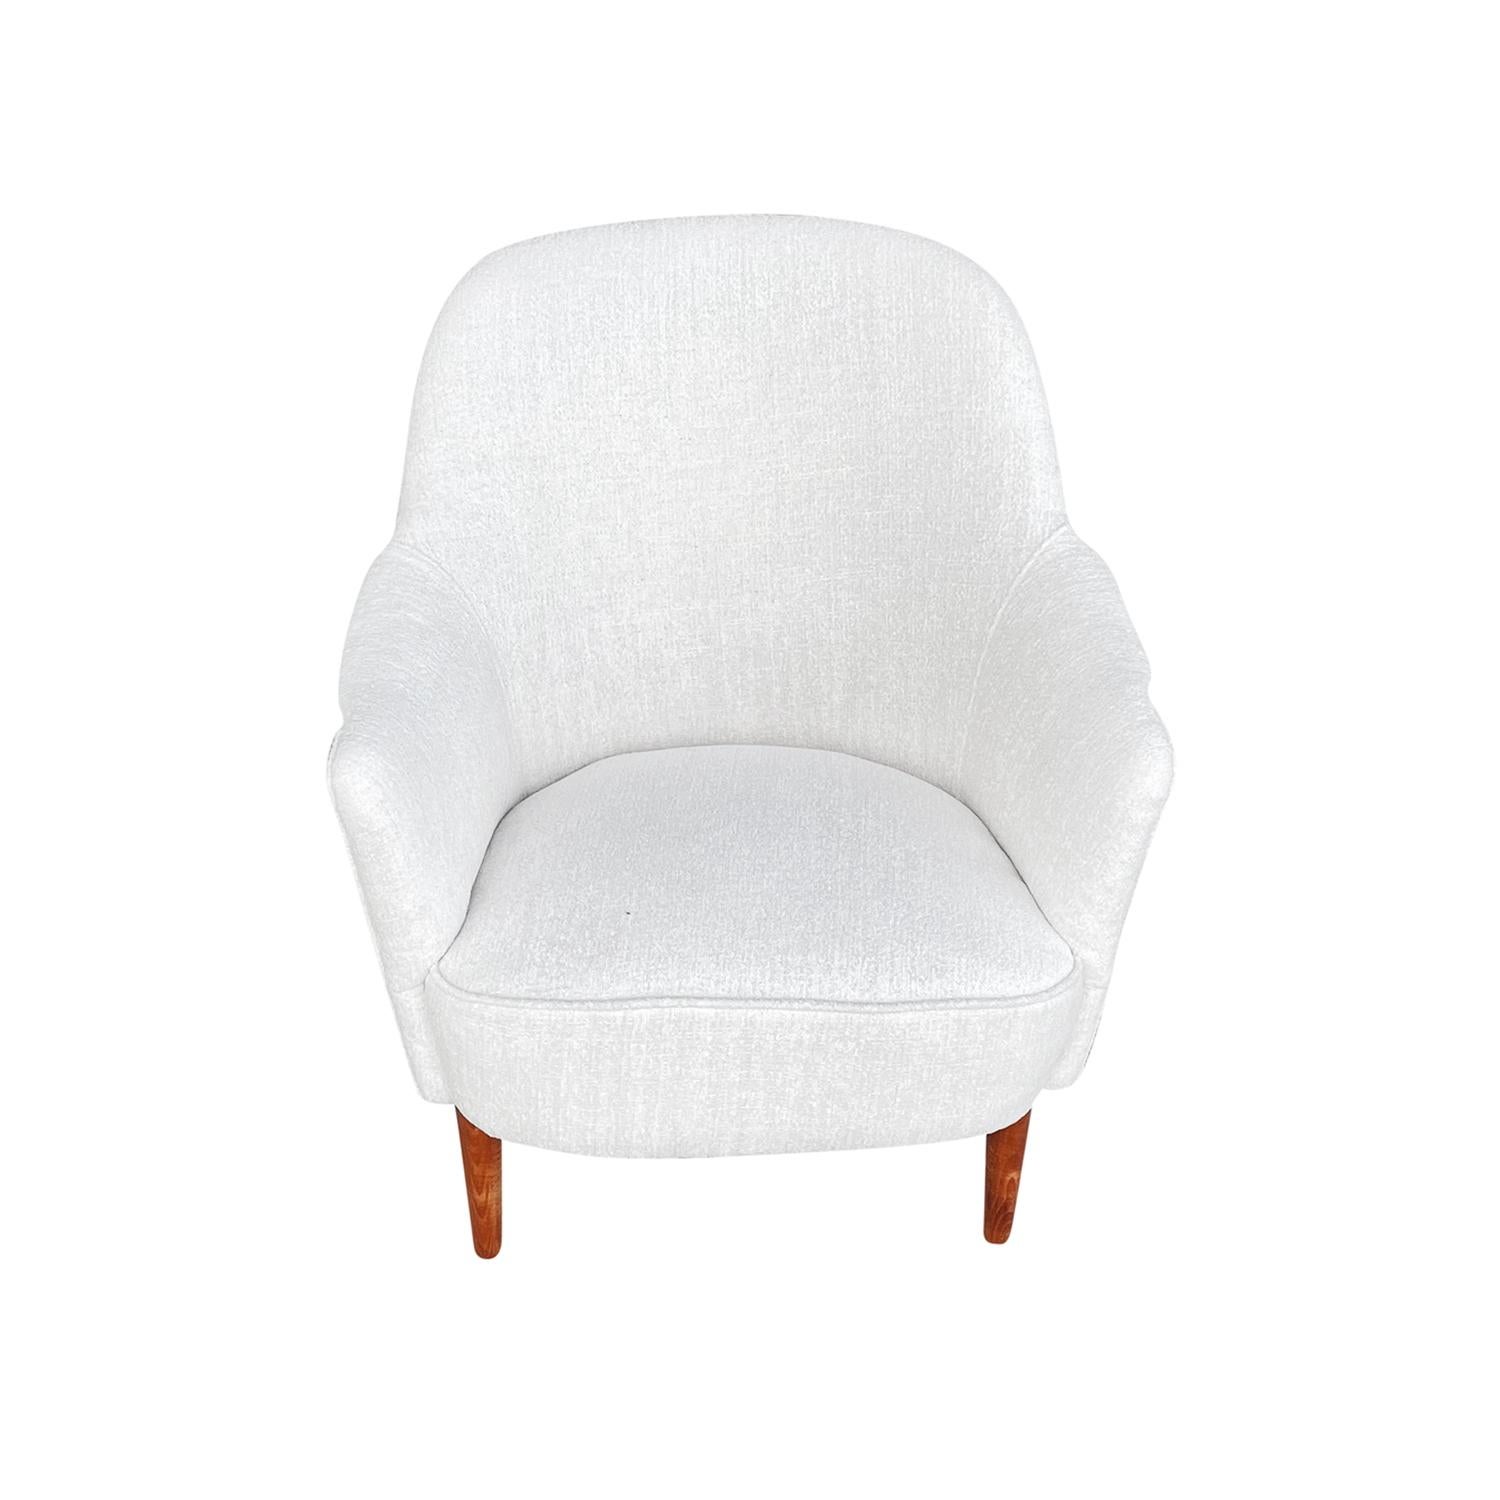 A small, vintage Mid-Century Modern Swedish Sample easy, lounge chair designed by Carl Malmsten in good condition. The Scandinavian armchair is standing on four slightly curved Birchwood feet. Newly upholstered in a white cotton fabric. Wear